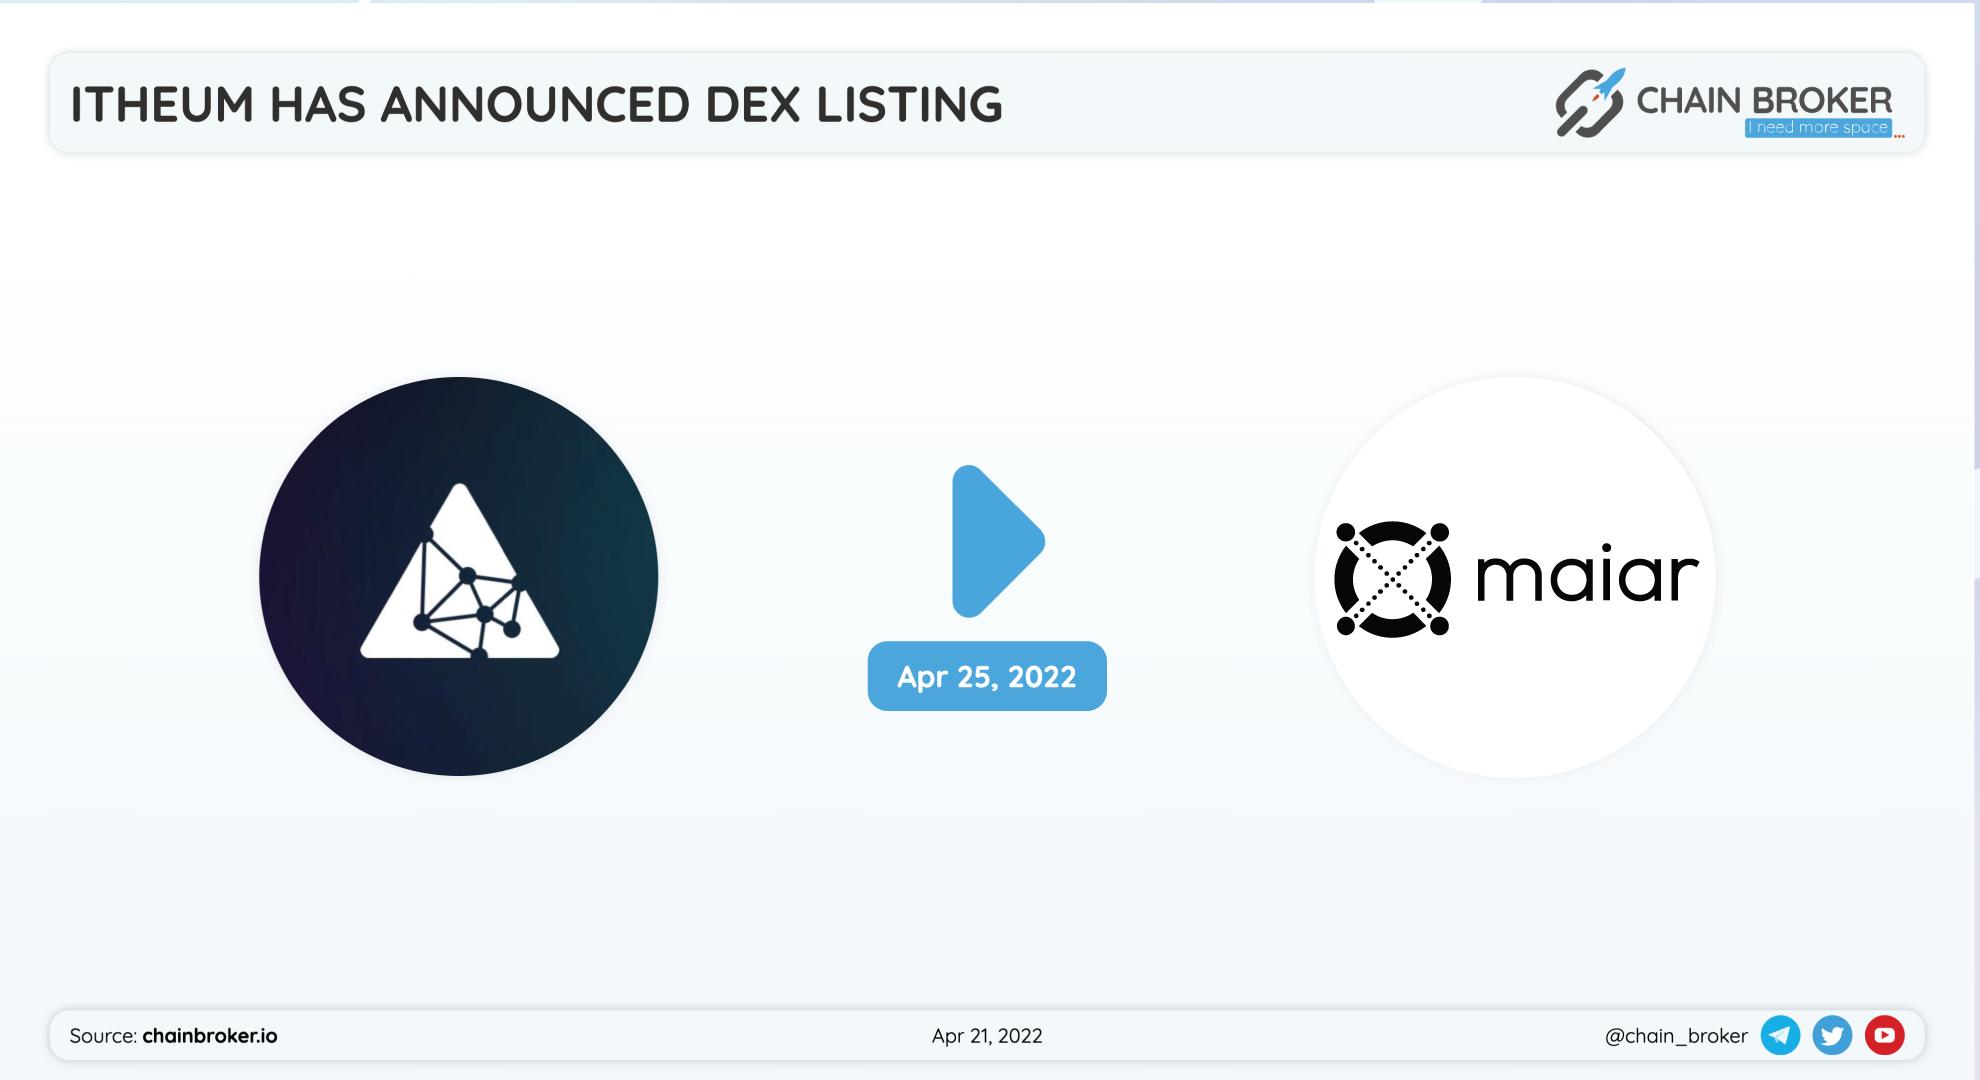 Itheum has partnered with MAIAR DEX for a token listing.